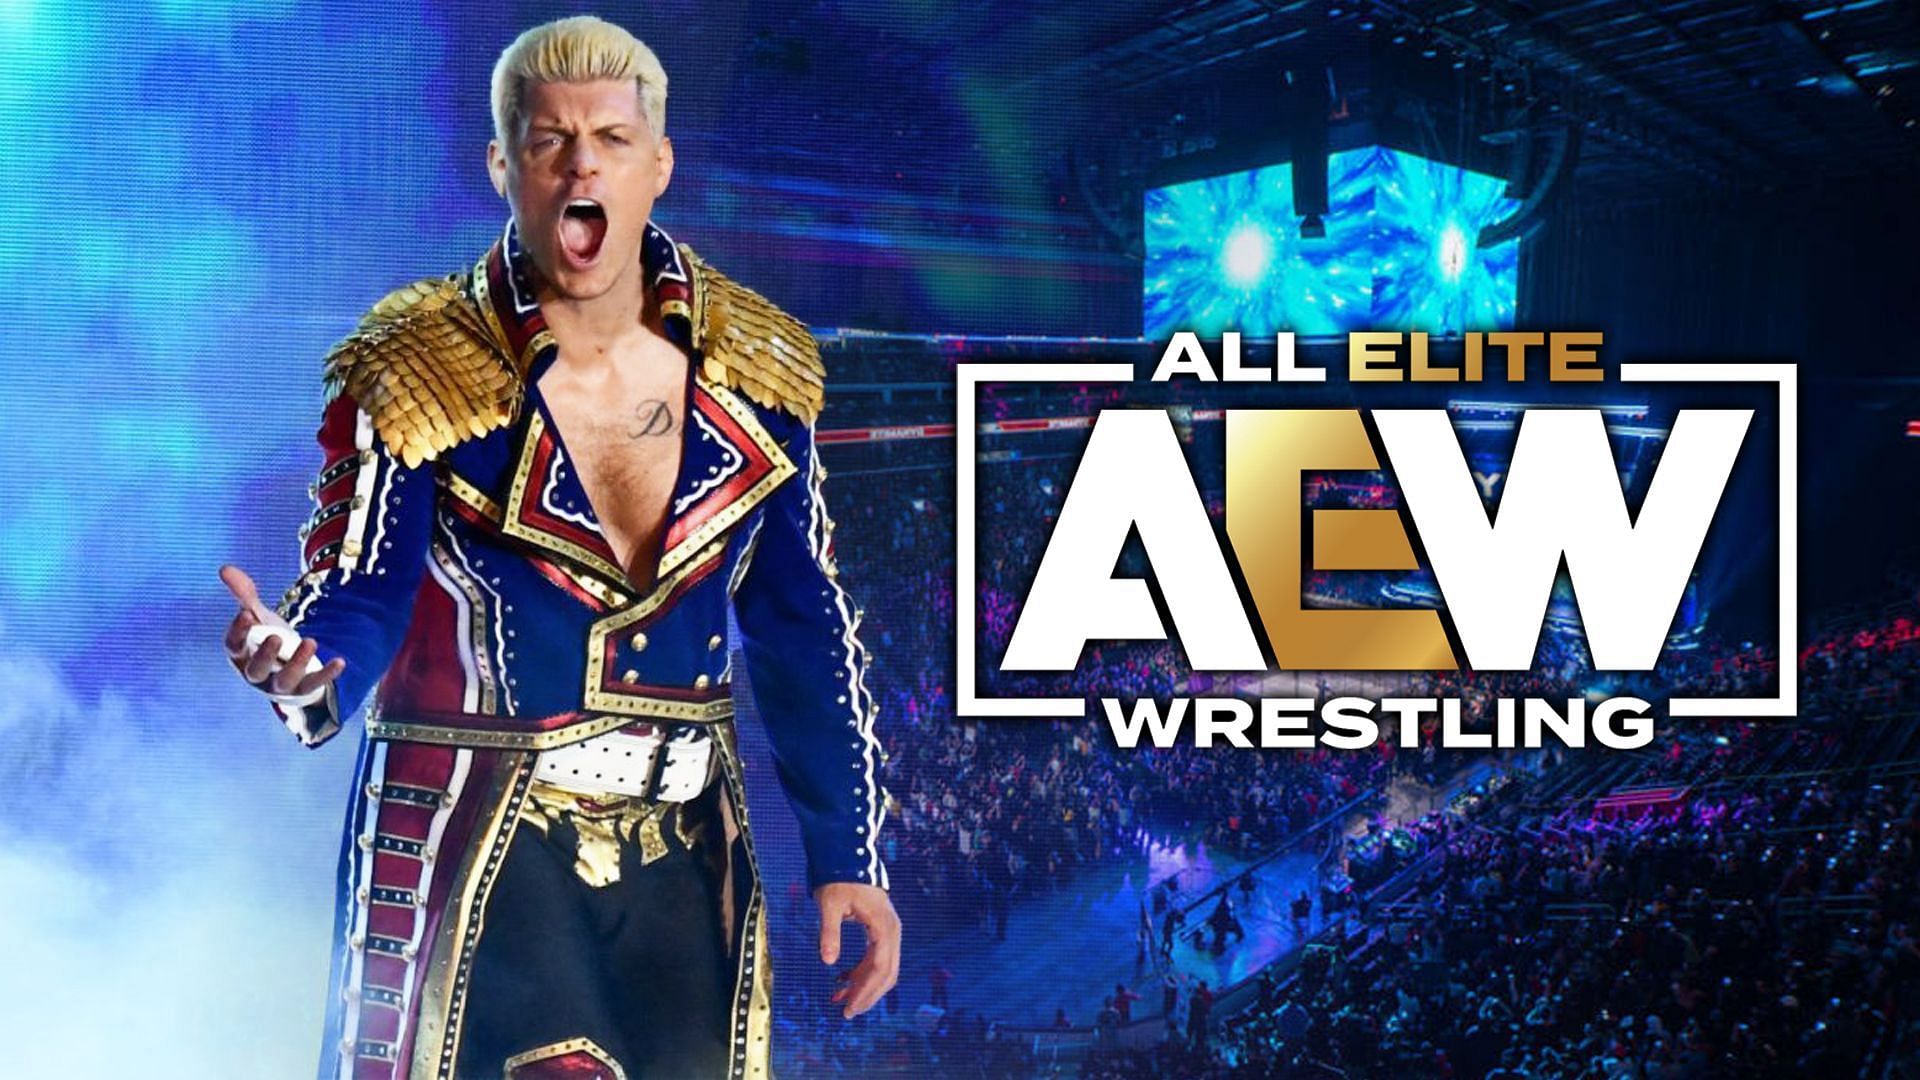 Cody is a co-founder and former EVP of AEW